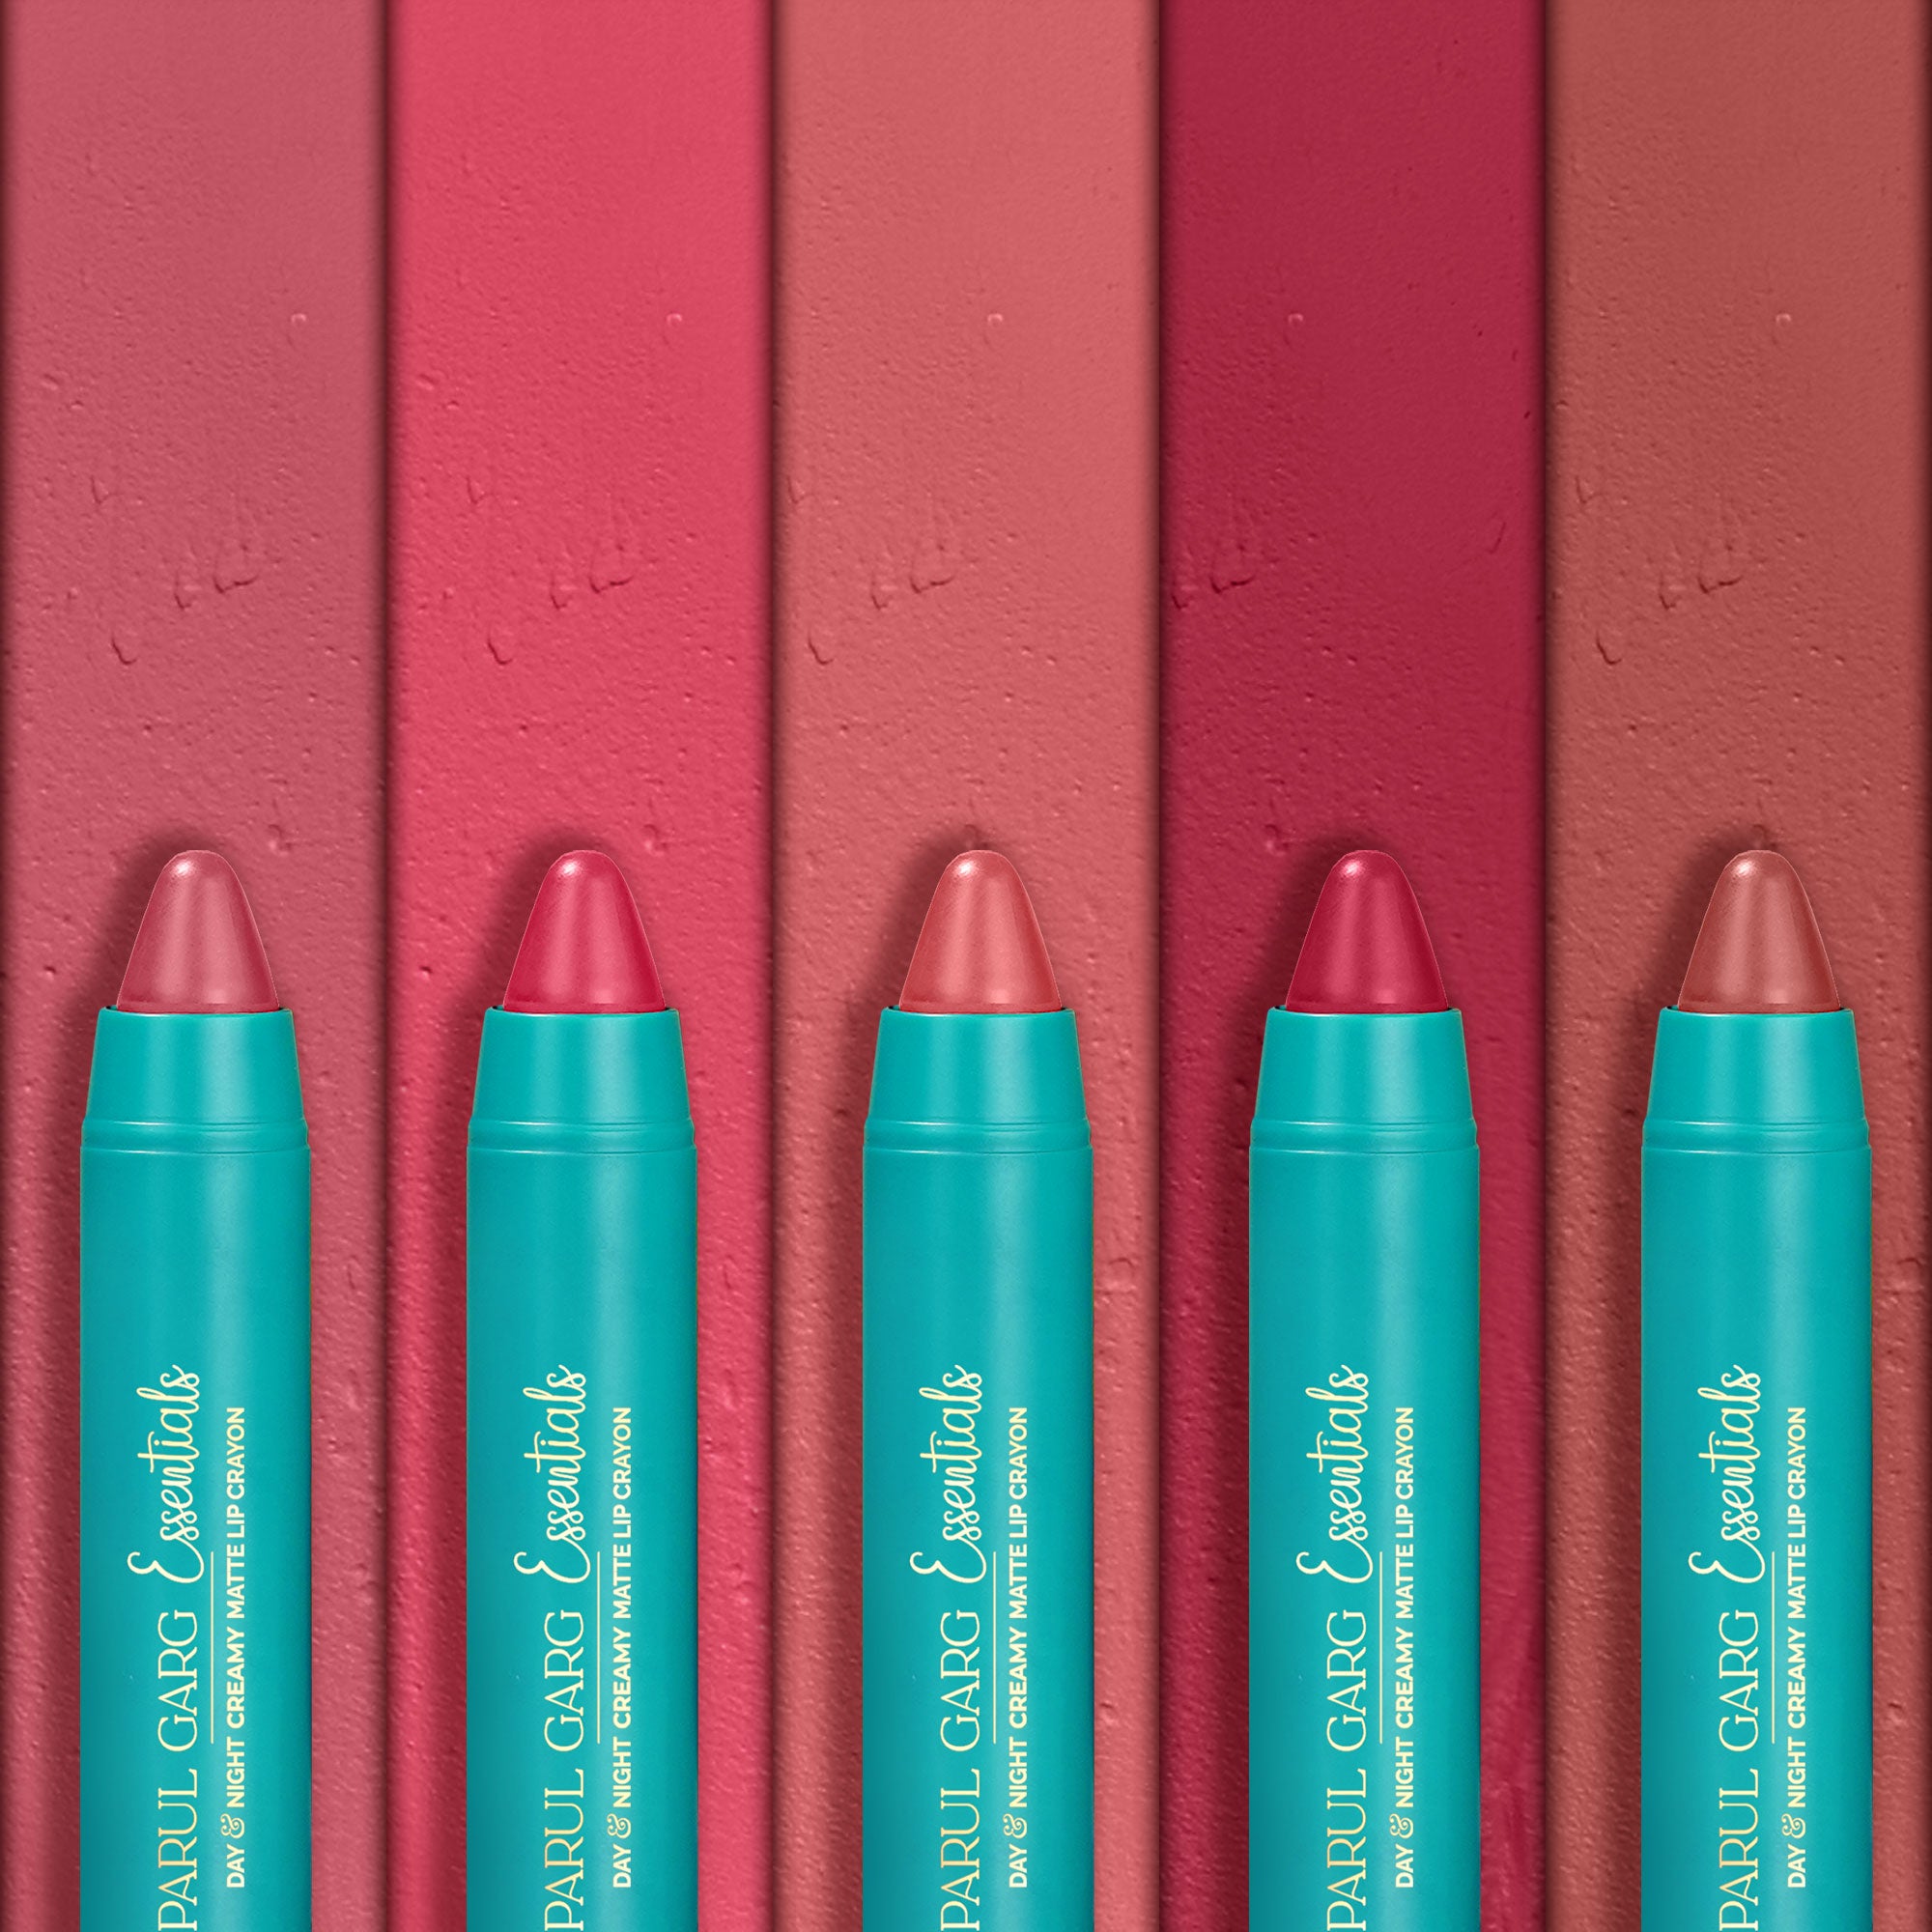 Vacation Vibes: Pack-of-Five Creamy Matte Lip Crayons